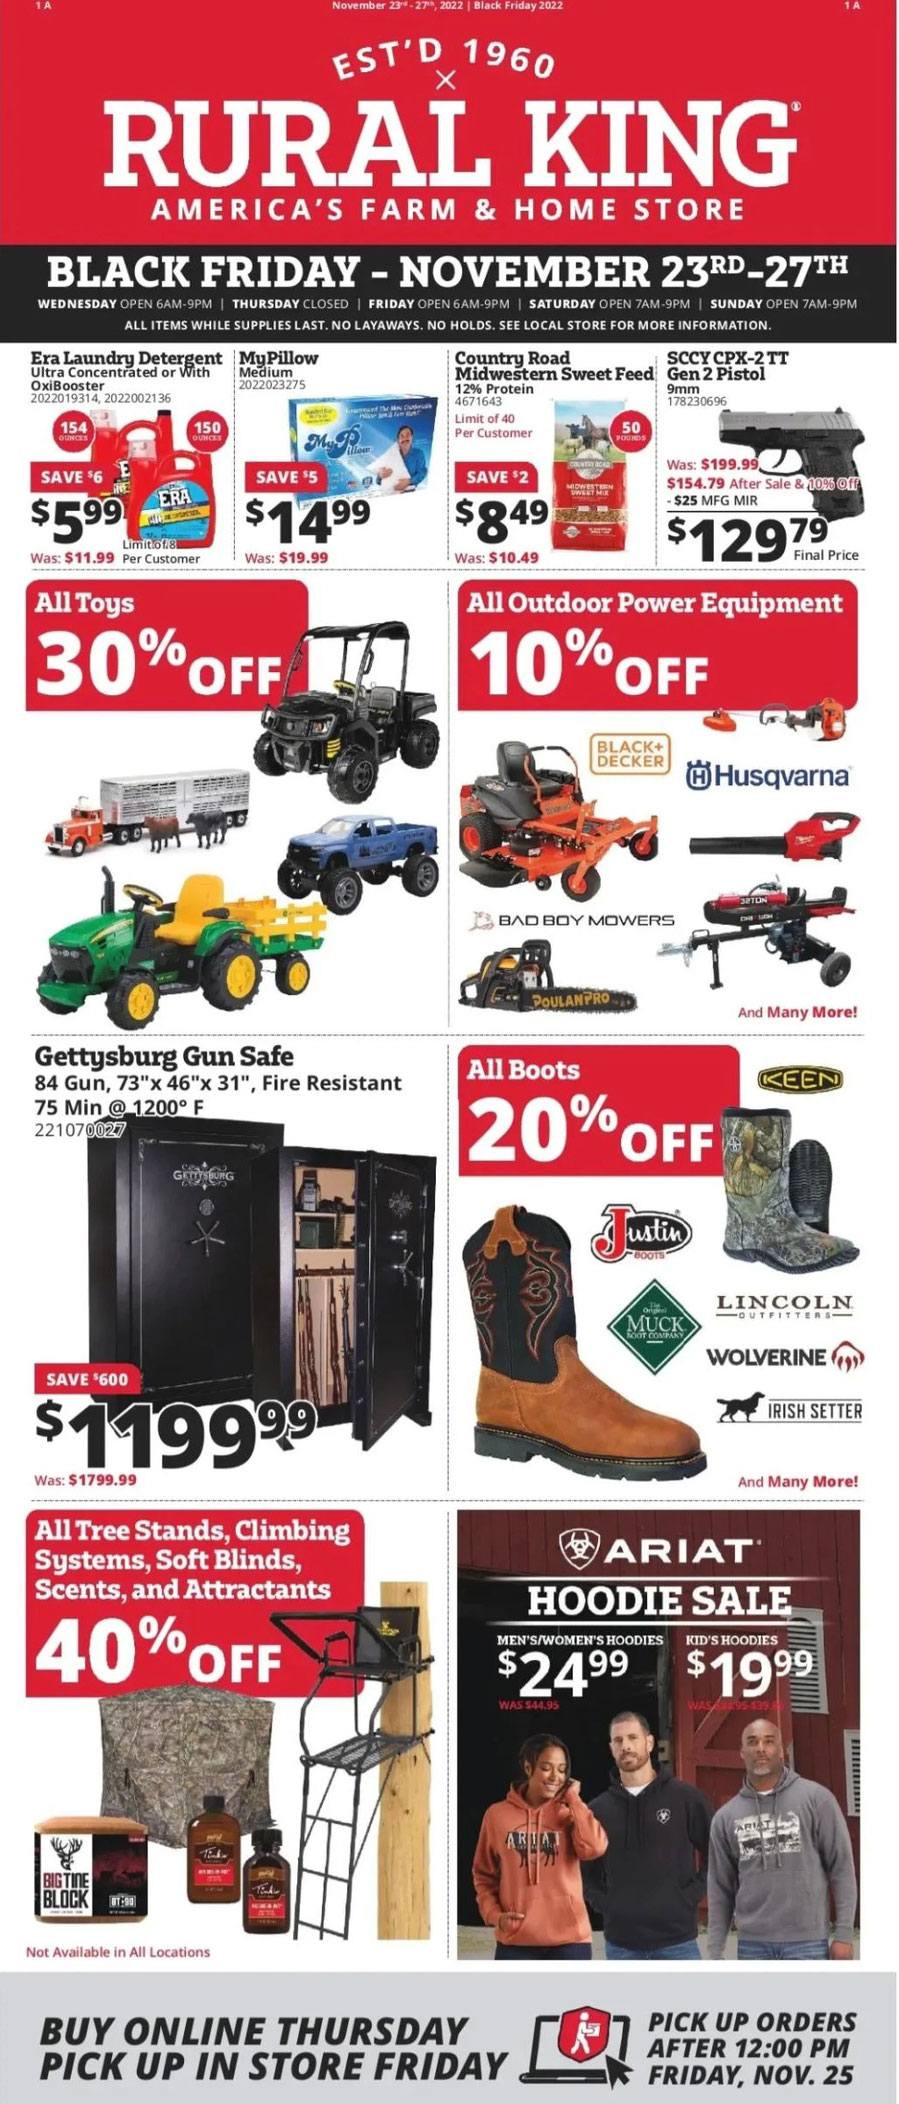 Rural King Black Friday 2023 Ad and Deals